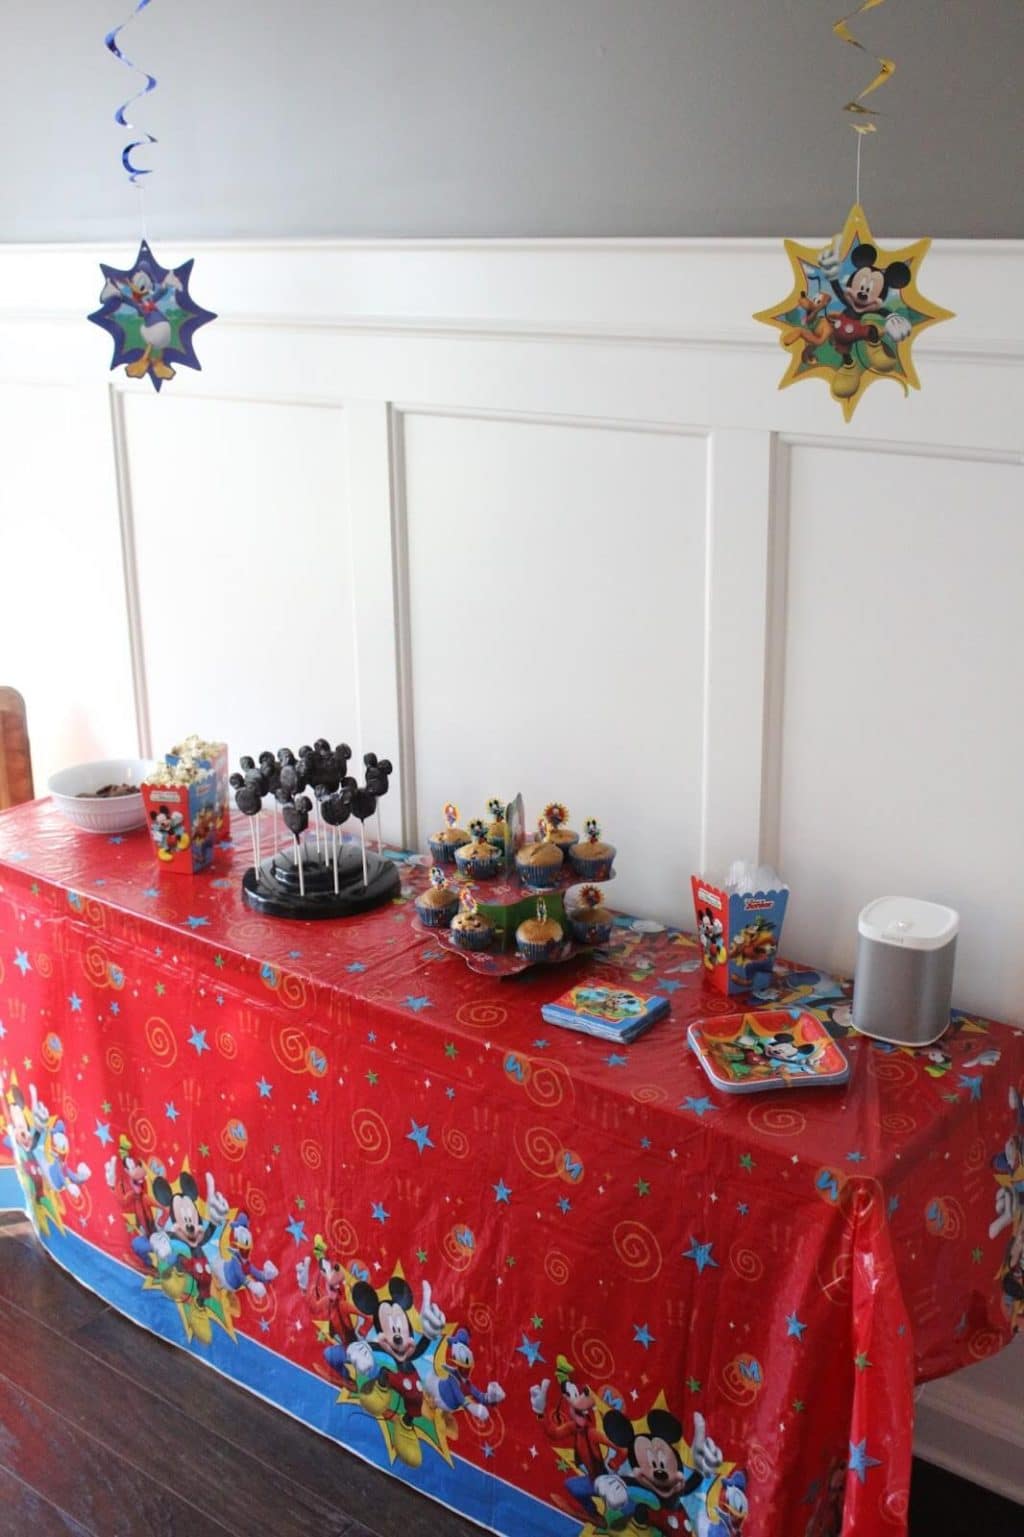 #DisneyKids Mickey Mouse Clubhouse party ideas, tips, food